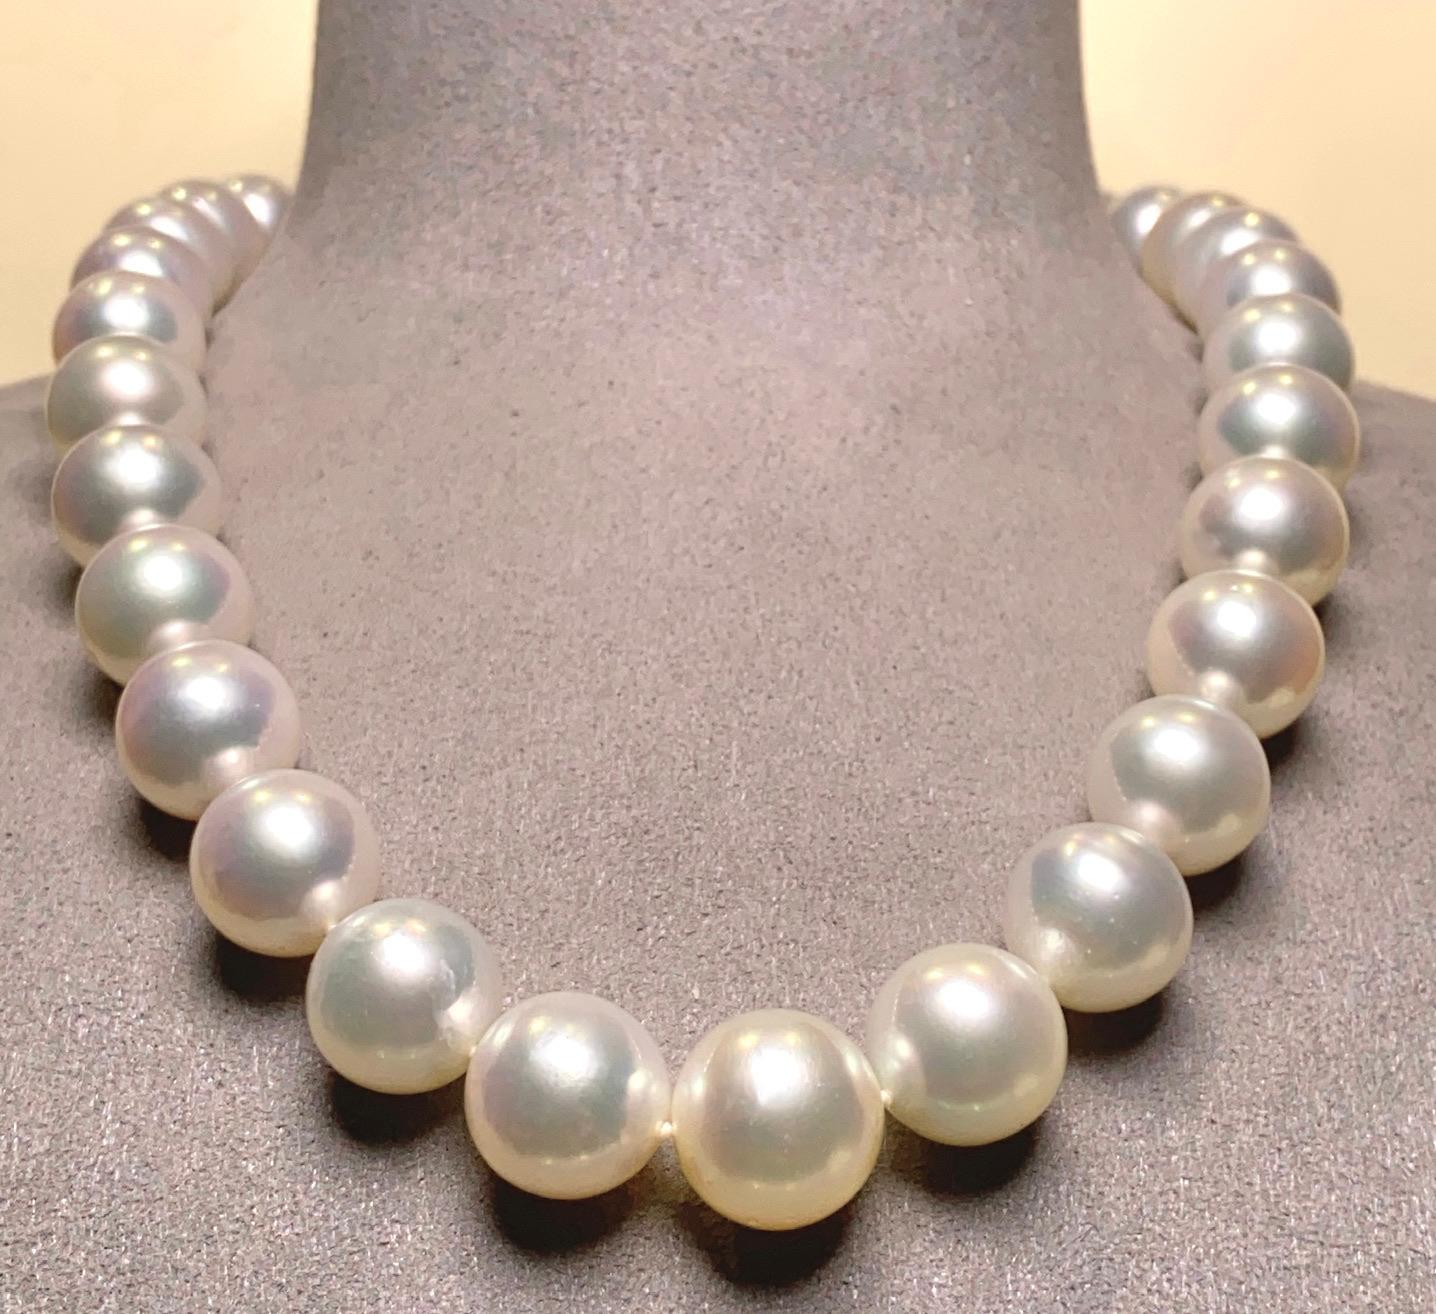 A Strand of an Impressive White South Sea Pearl Necklace with 18K Gold Clasp. The size of the pearls are ranging from 13mm-15mm. This is a very elegant pearl necklace and is perfect for any occasions. 

A 13 mm to 15.6 mm White South Sea Pearl